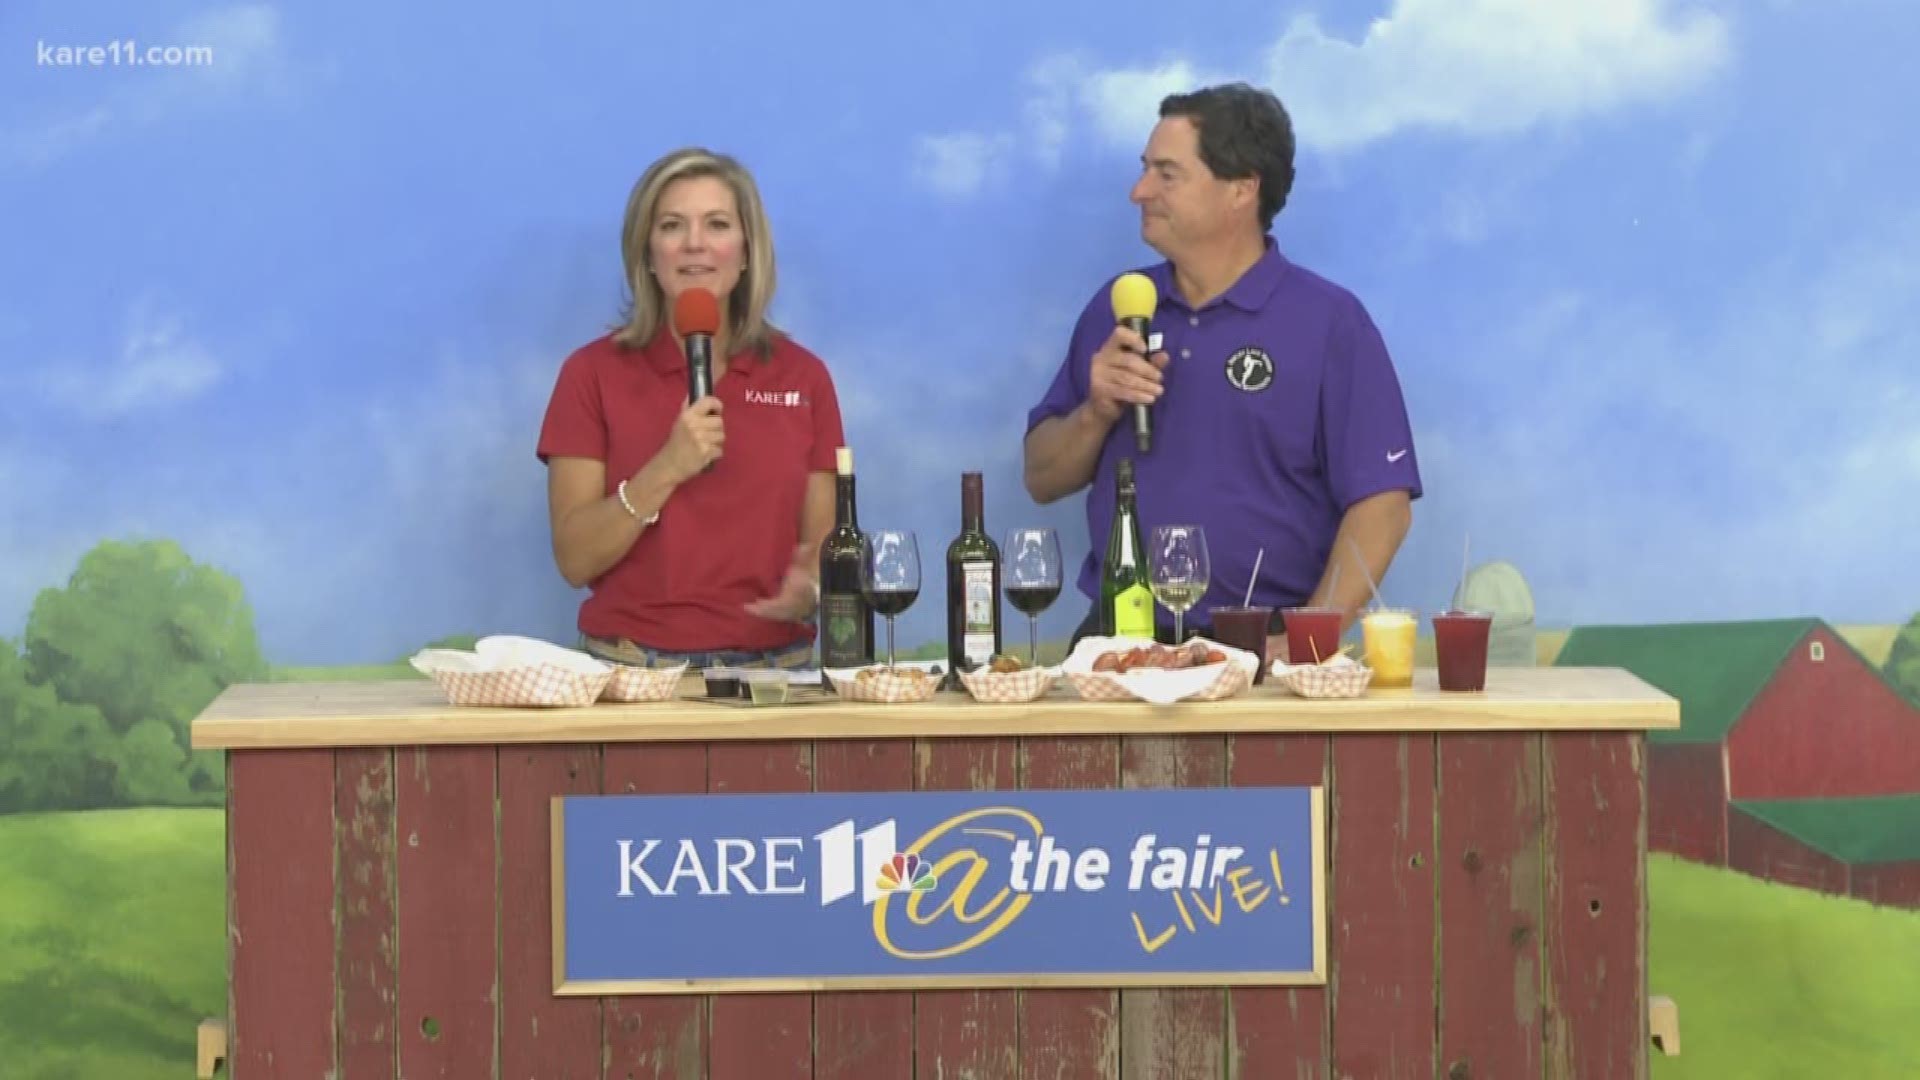 It's wine time! Steve Zeller from Parley Lakes Winery in Waconia joins KARE 11 News at 4 to talk about Minnesota Wine Country at the fair.